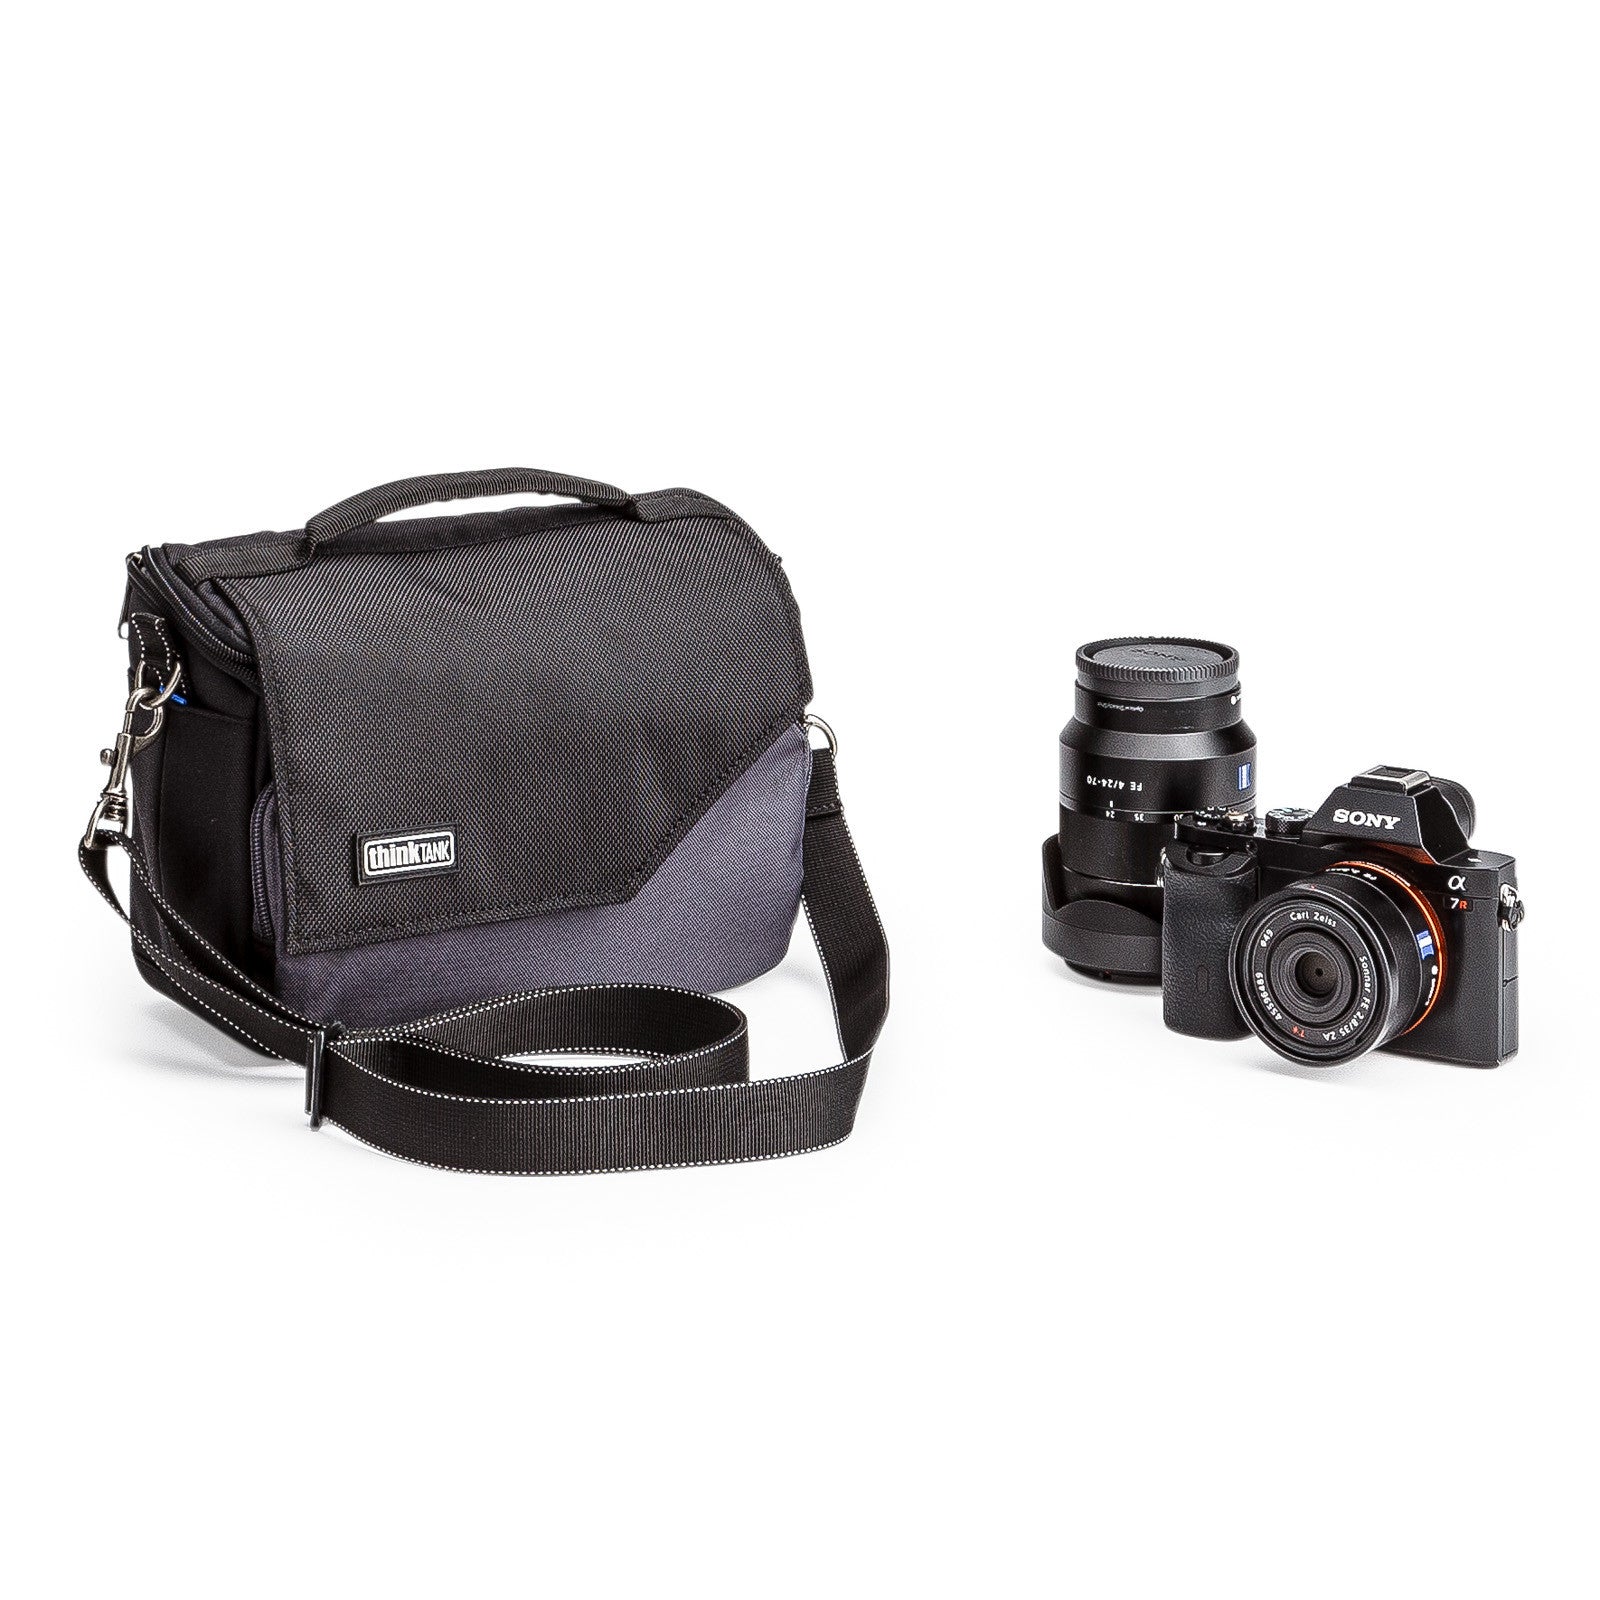 Think Tank Mirrorless Mover 20 Camera Bag (Charcoal), bags shoulder bags, Think Tank Photo - Pictureline  - 1